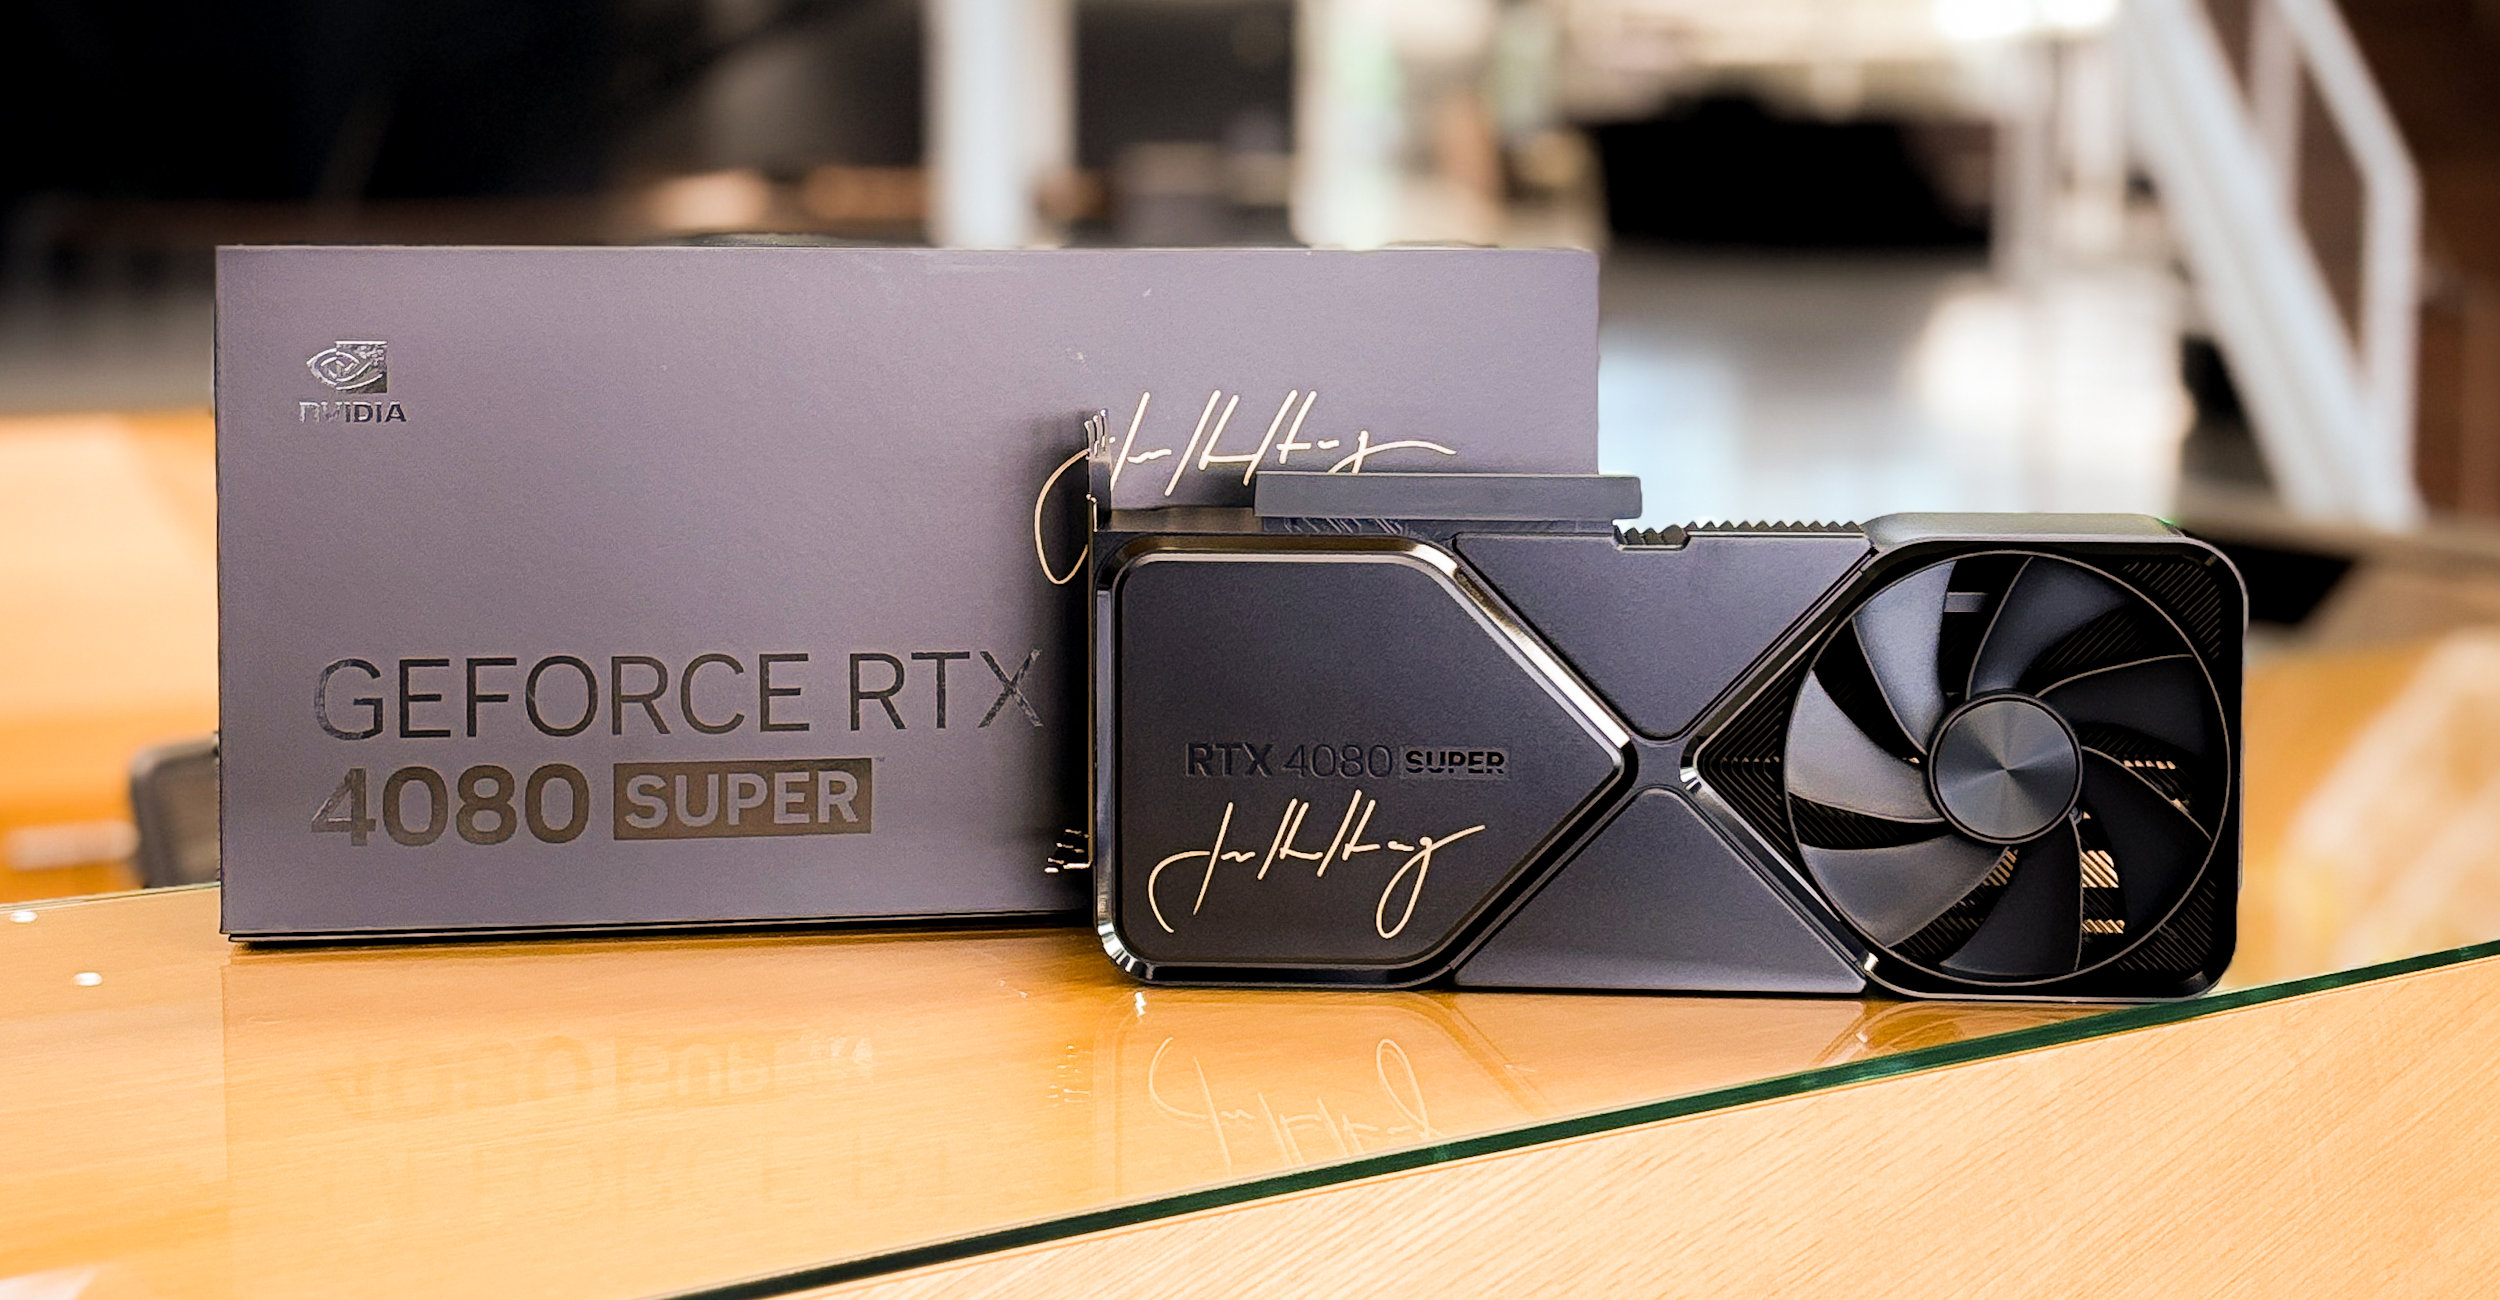 NVIDIA presents the GeForce RTX 4080 SUPER signed by its CEO Jensen Huang